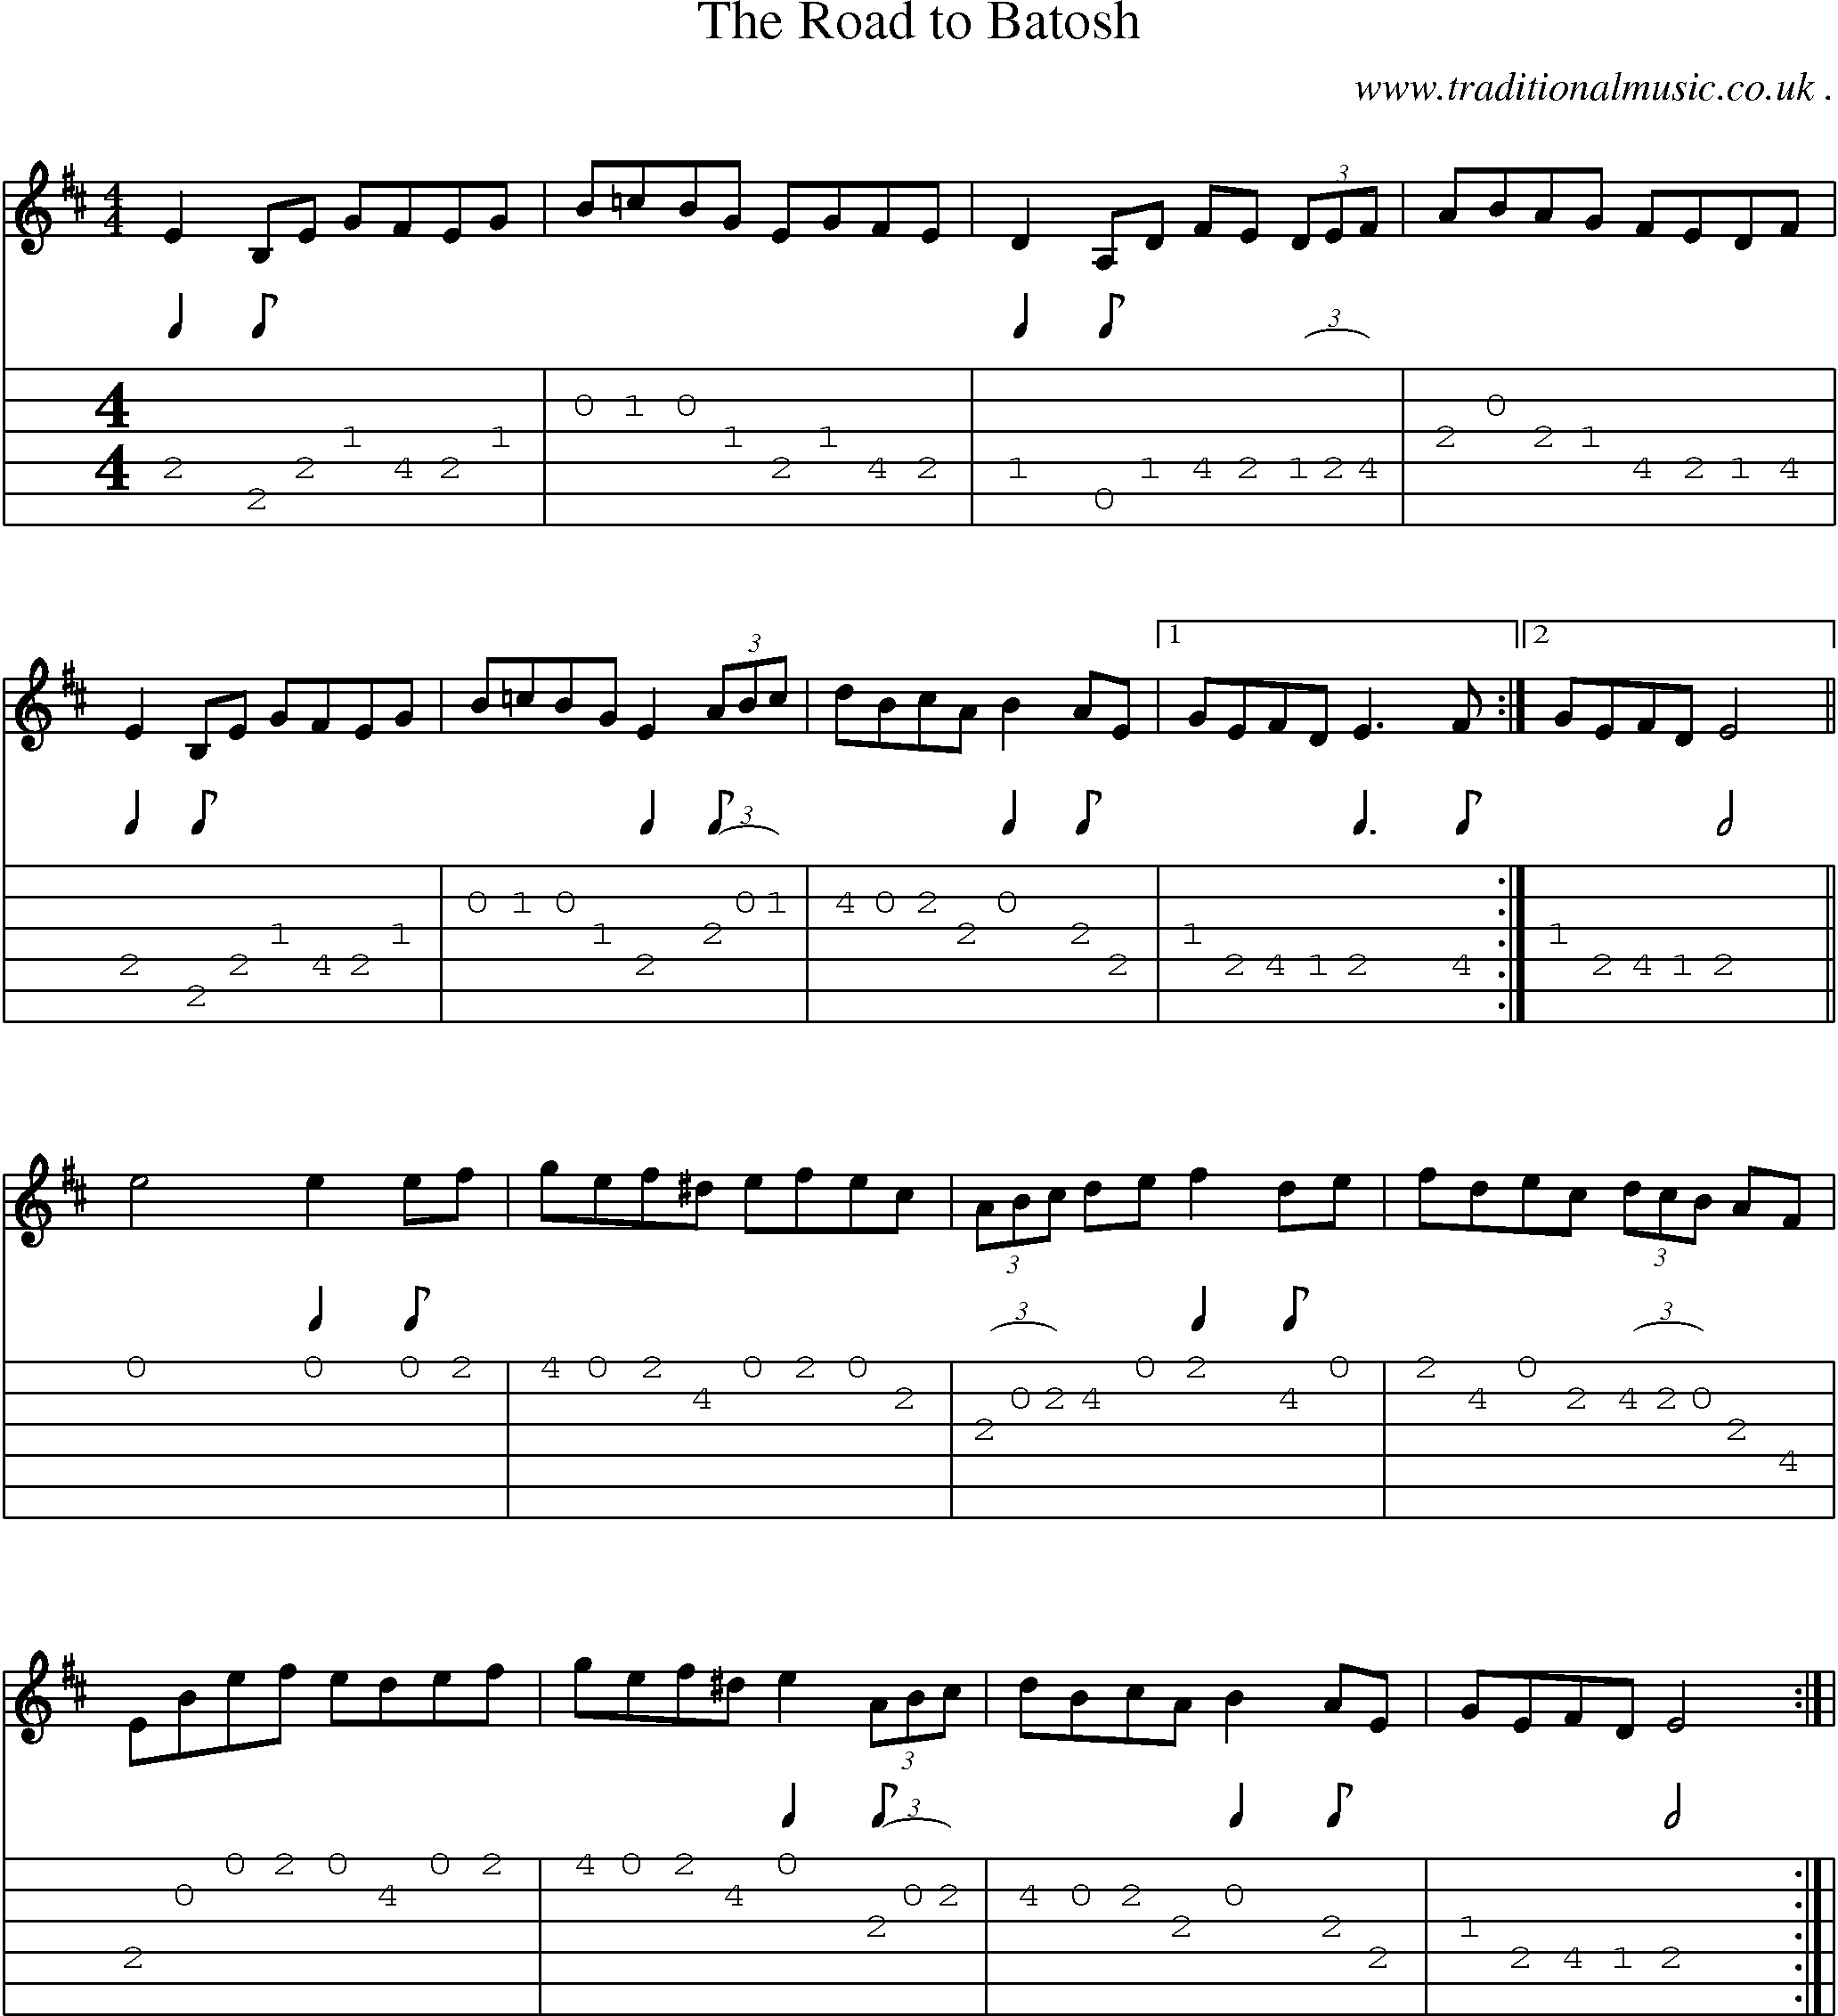 Sheet-Music and Guitar Tabs for The Road To Batosh